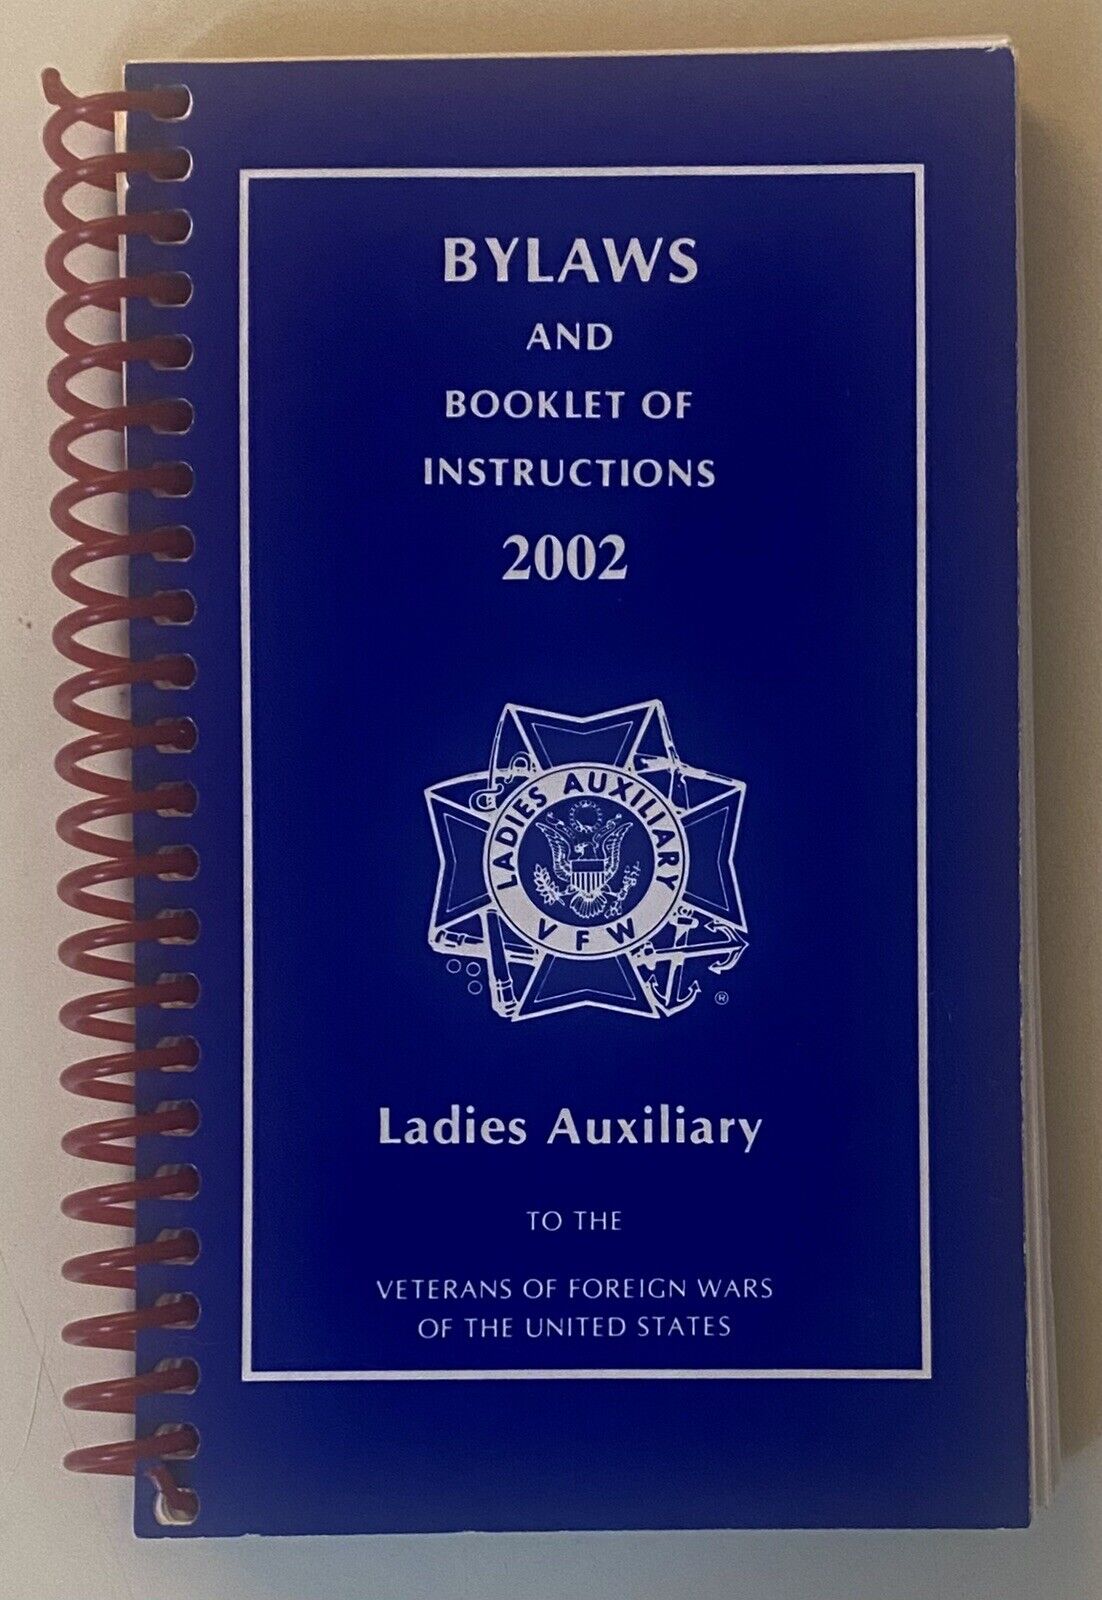 Ladies Auxiliary Bylaws and Booklet of Instructions 2002